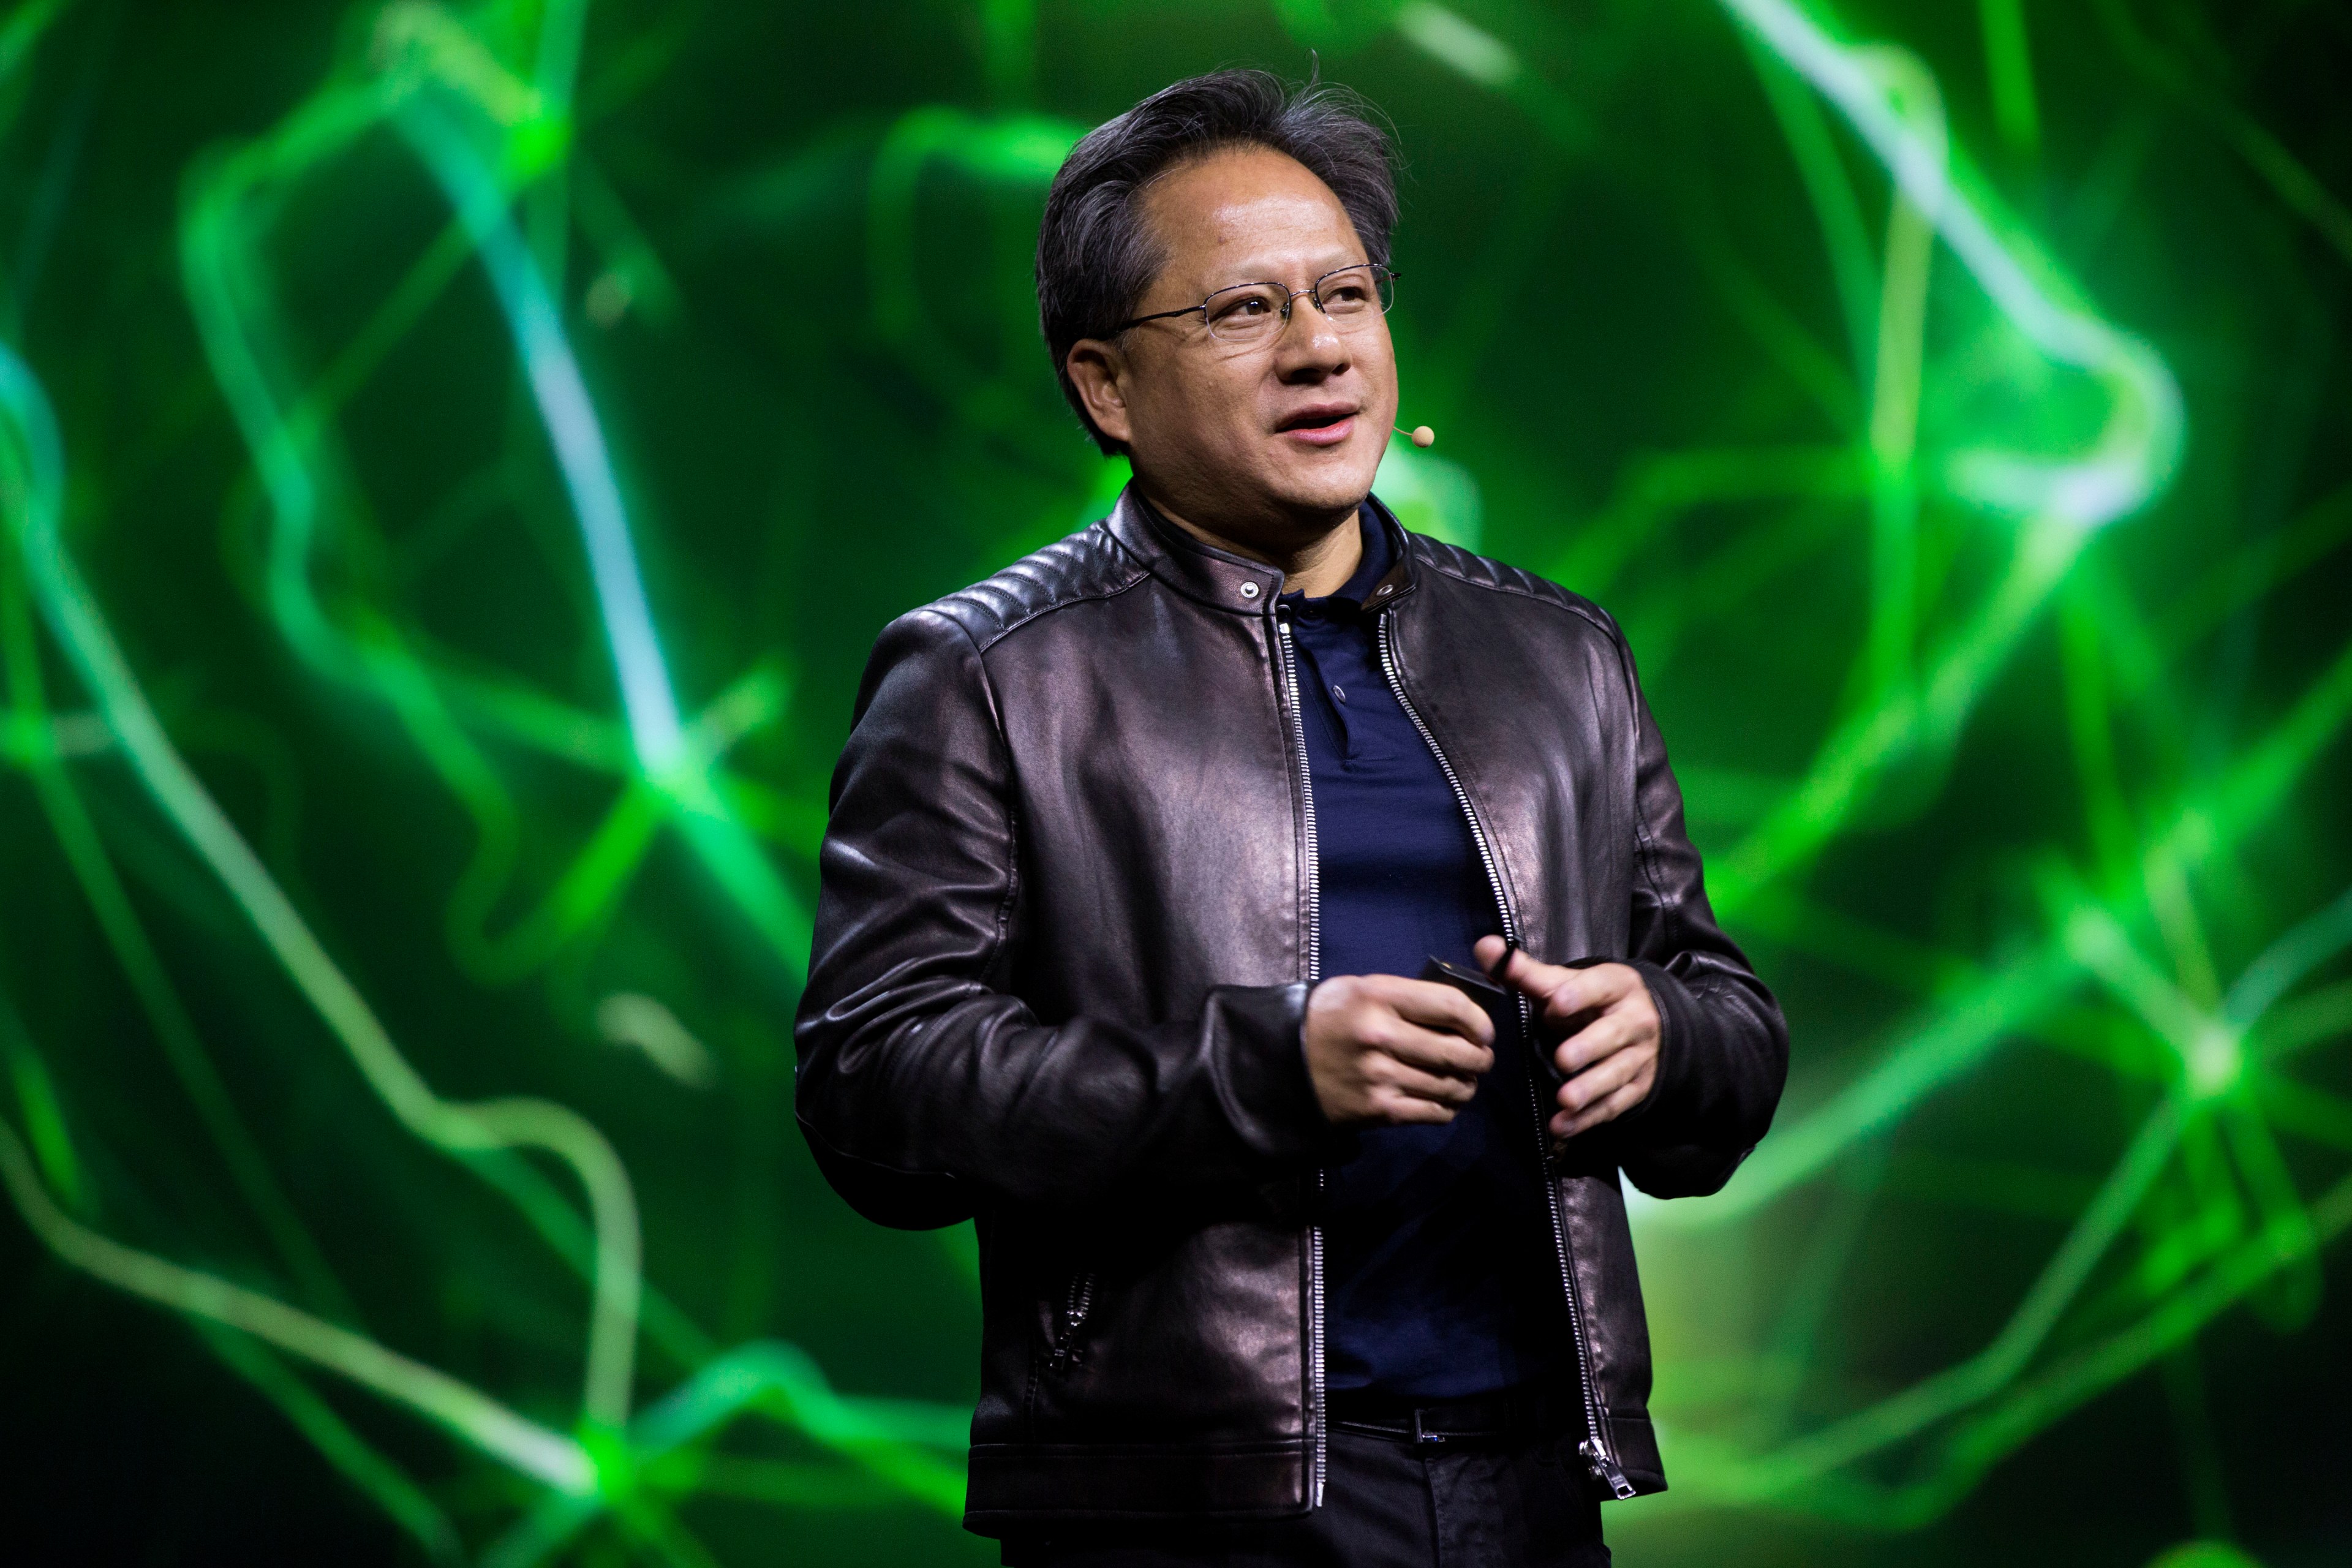 A person is speaking on stage with dynamic green lighting in the background. They're wearing glasses and a black leather jacket.